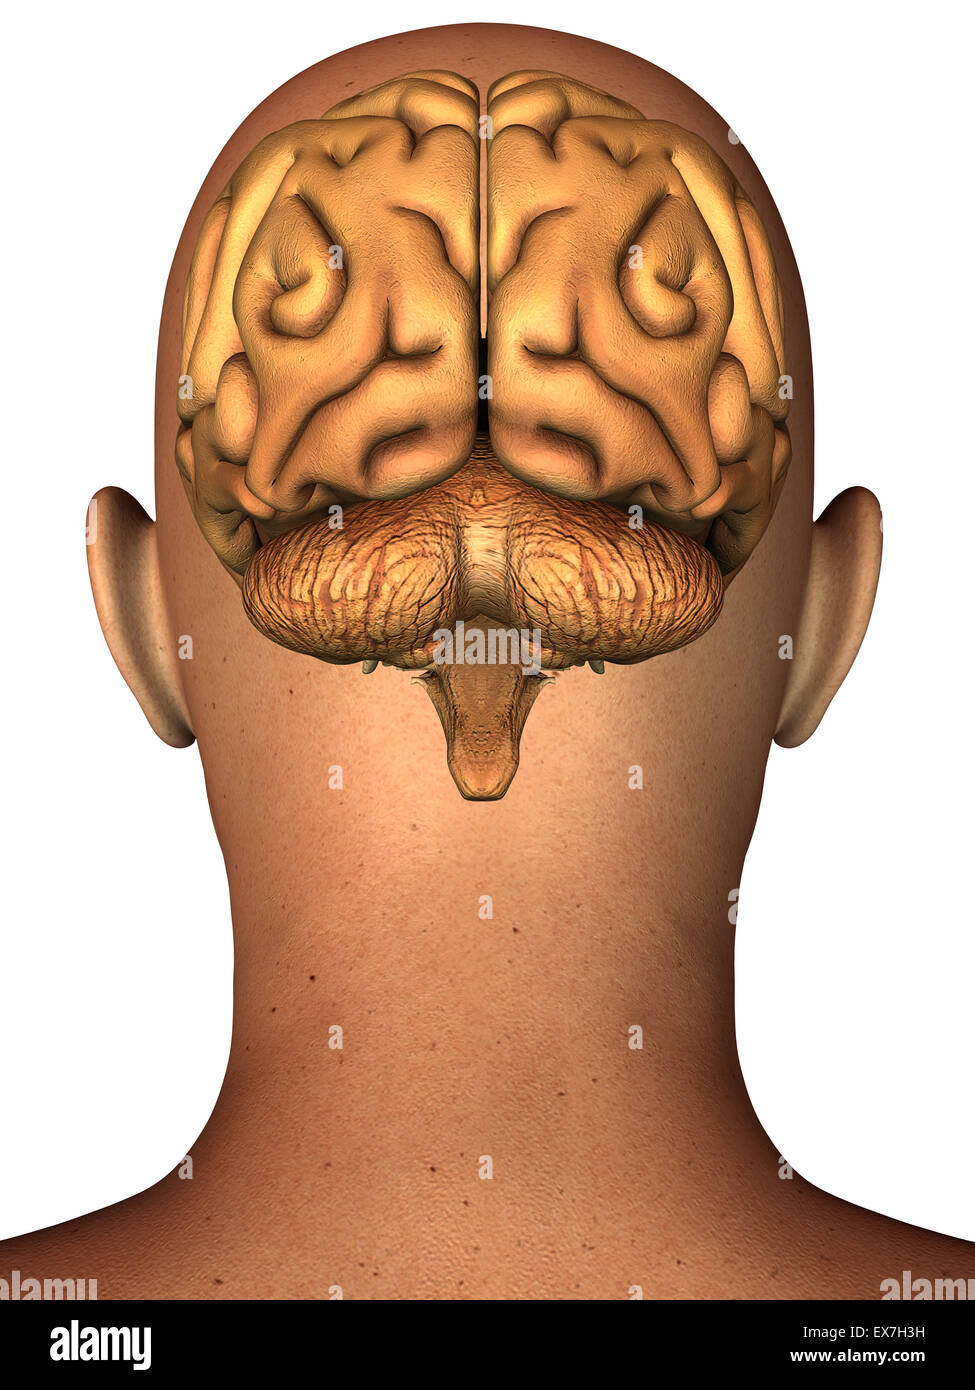 Anatomical illustration of the human brain in posterior view superimposed on a head. Stock Photo